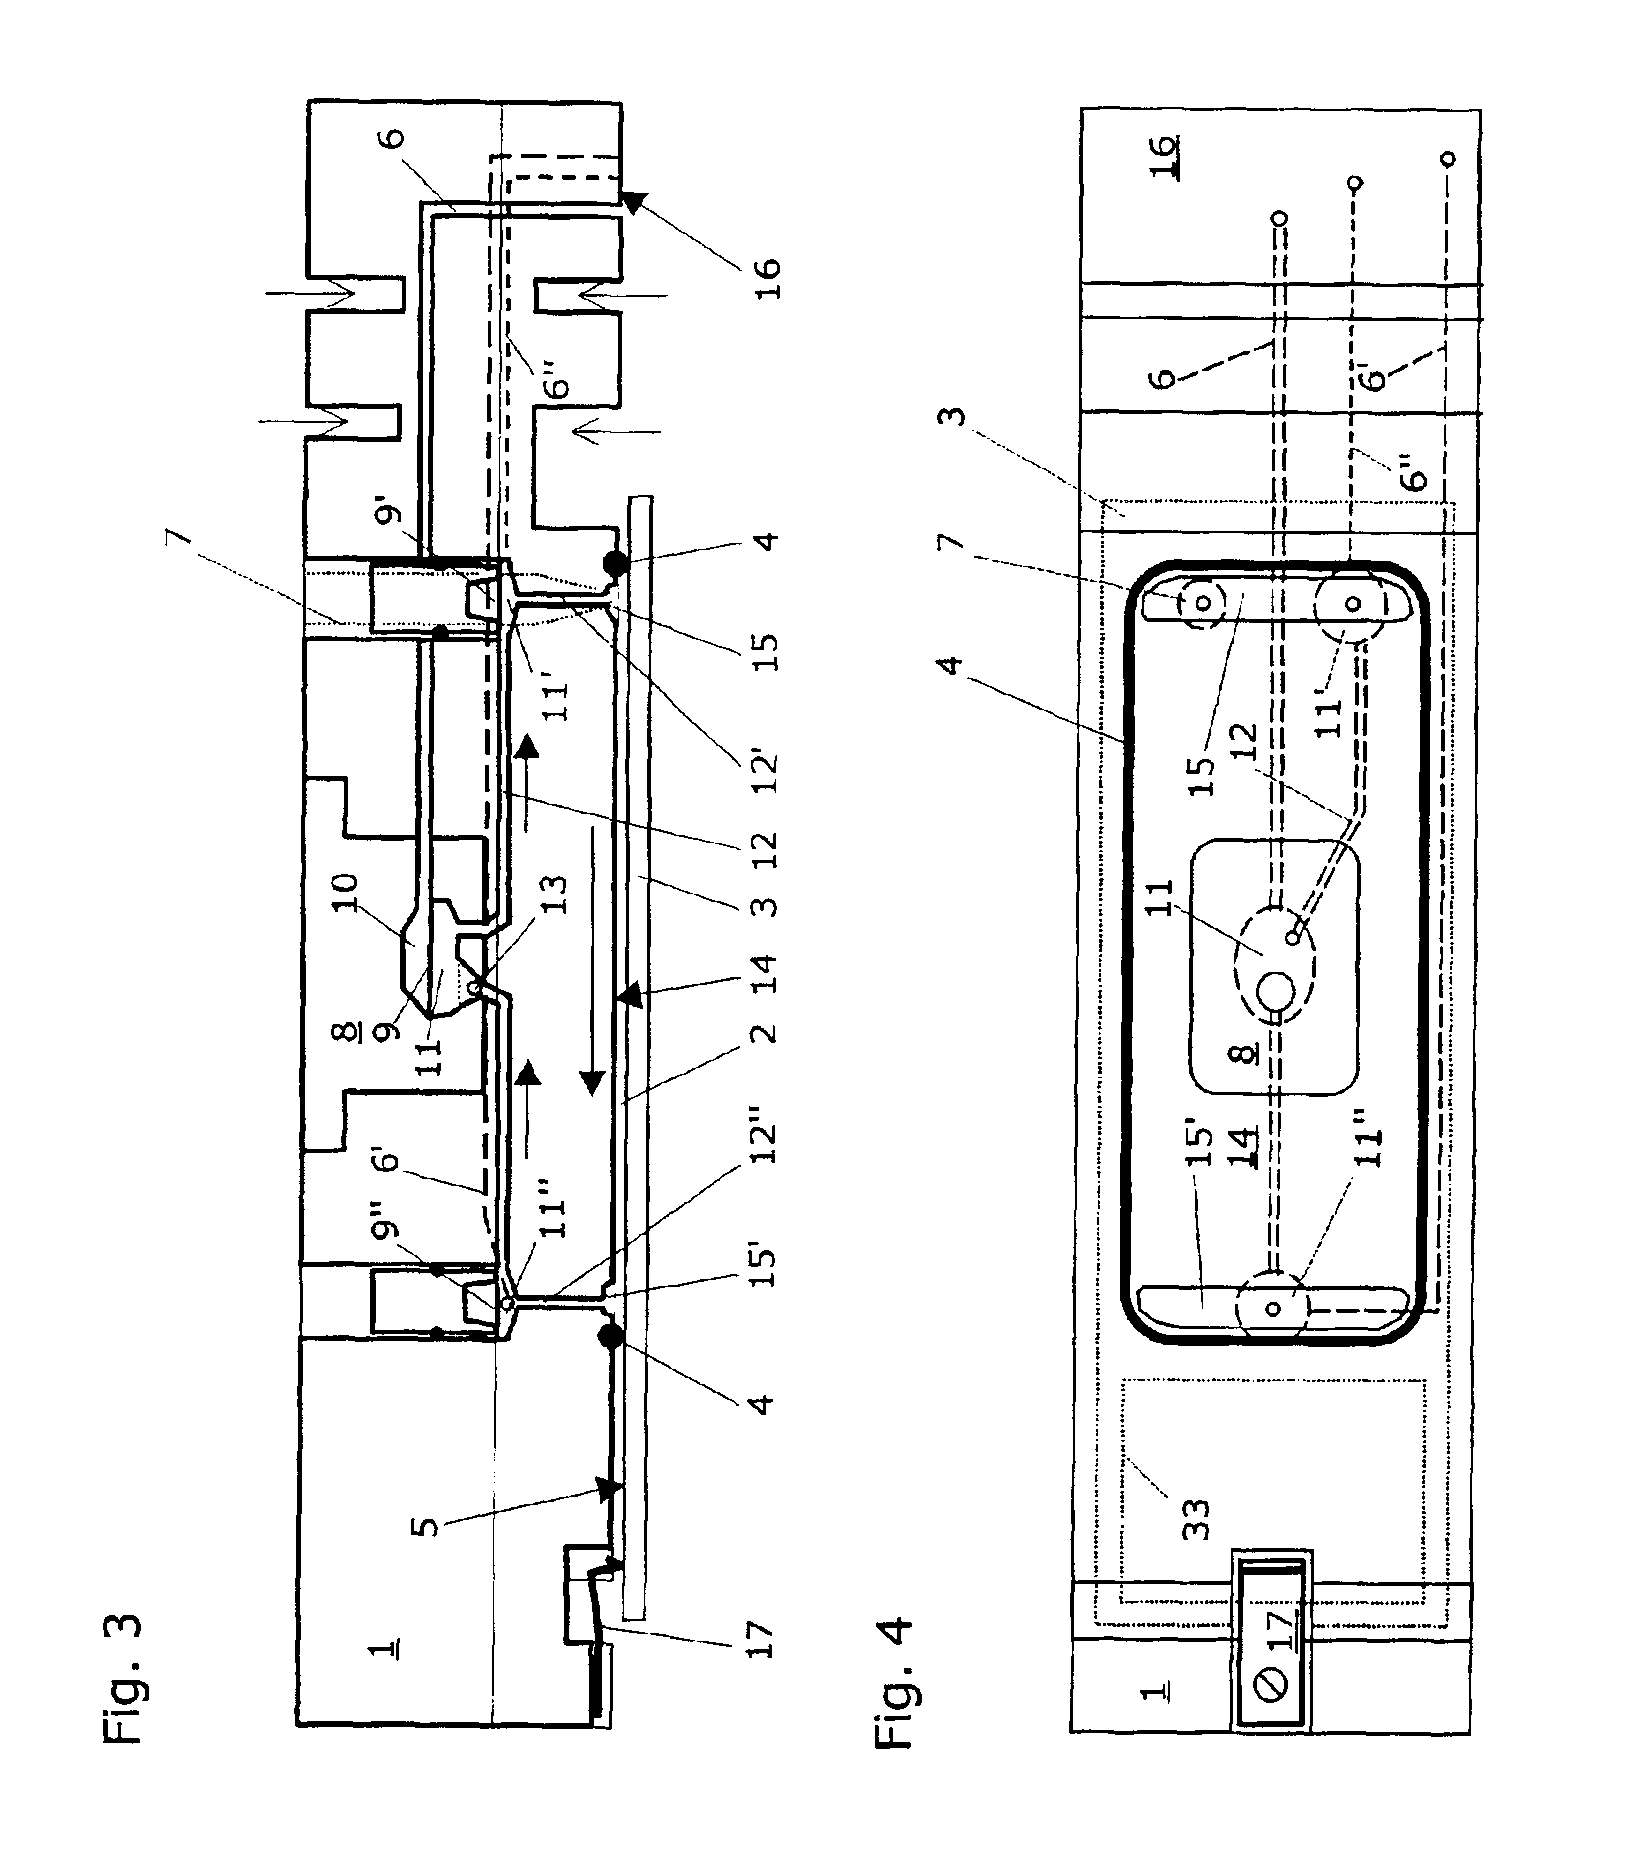 Device for providing a hybridization chamber, and process unit and system for hybridizing nucleic acid samples, proteins, and tissue sections